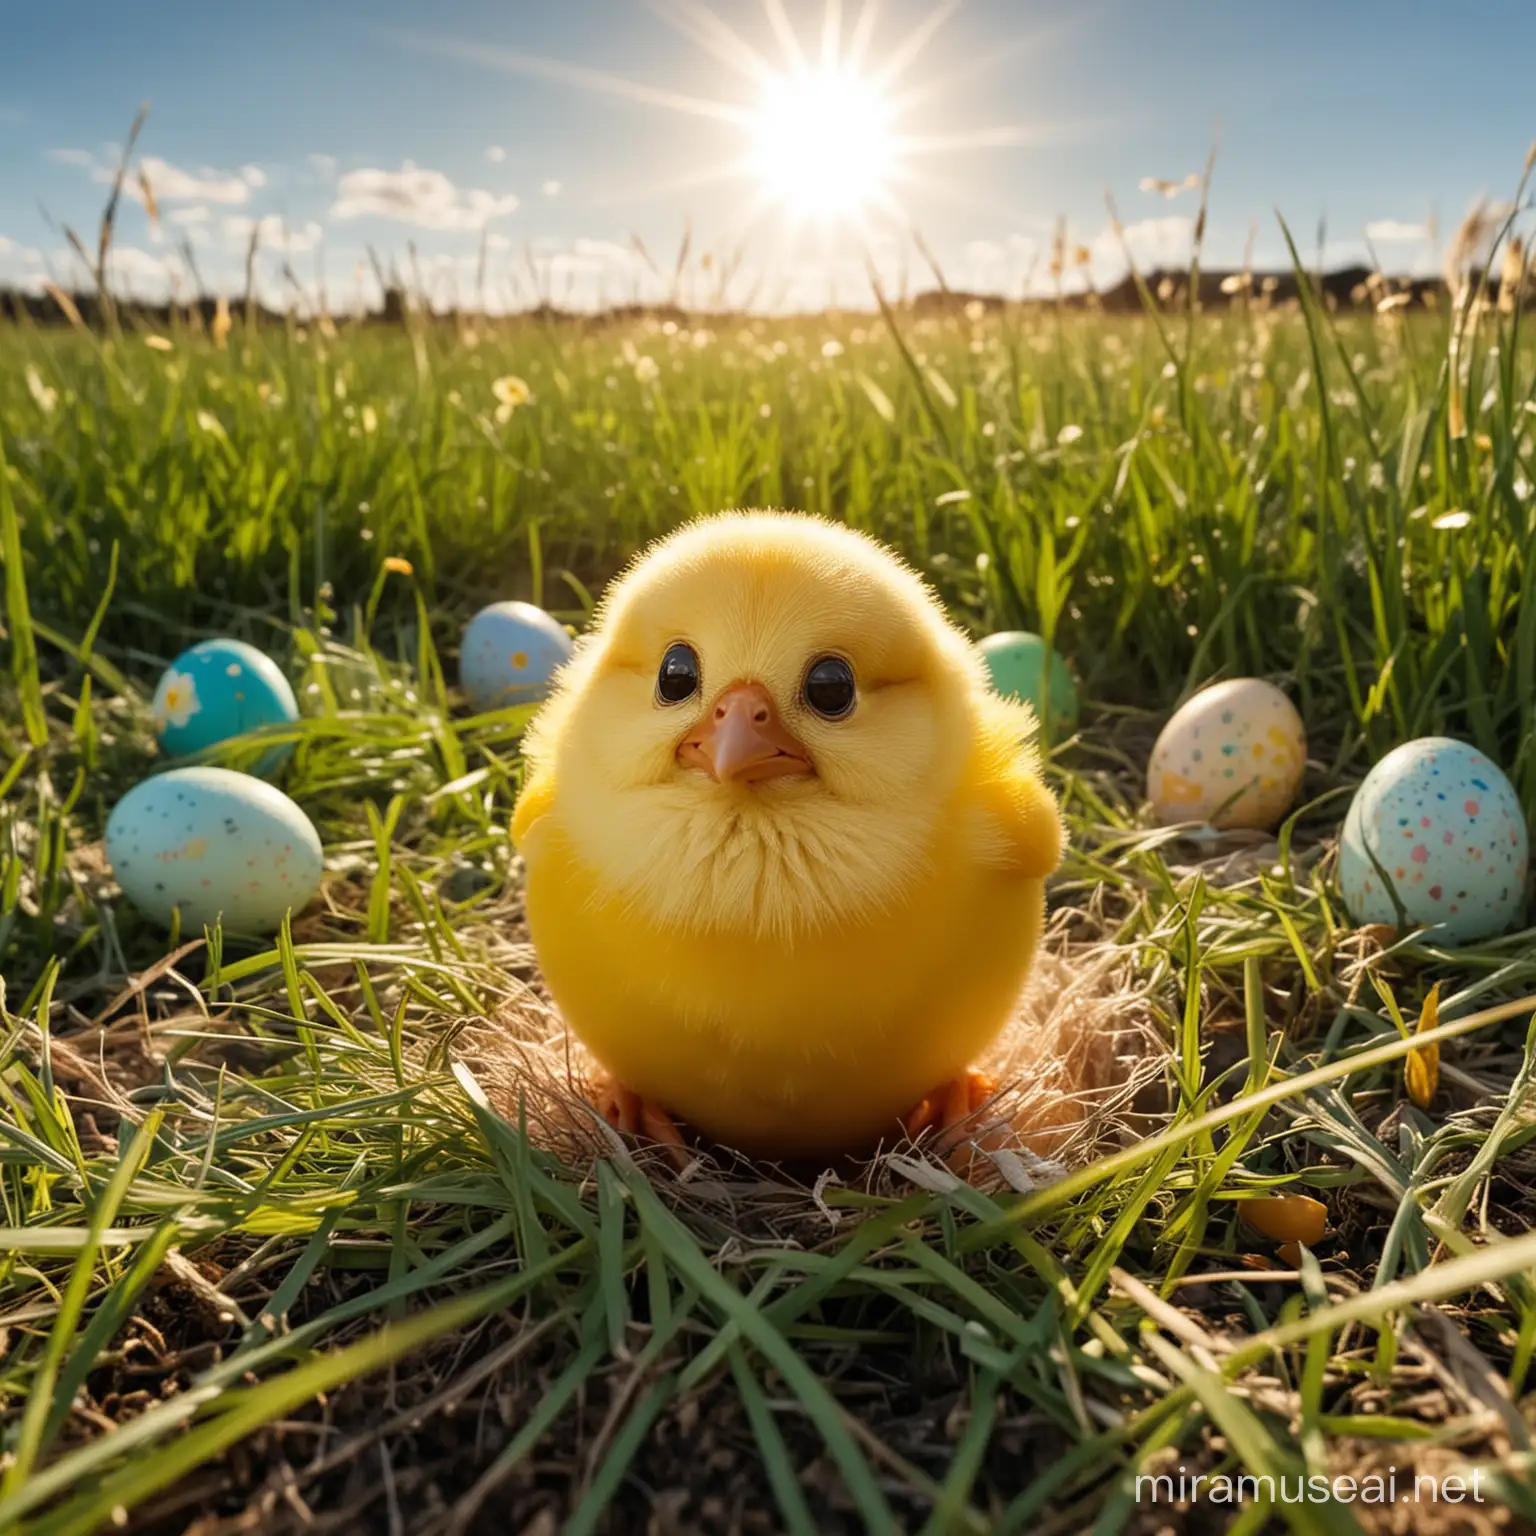 Eccentric Chick Emerges from Easter Egg in Sunny Meadow